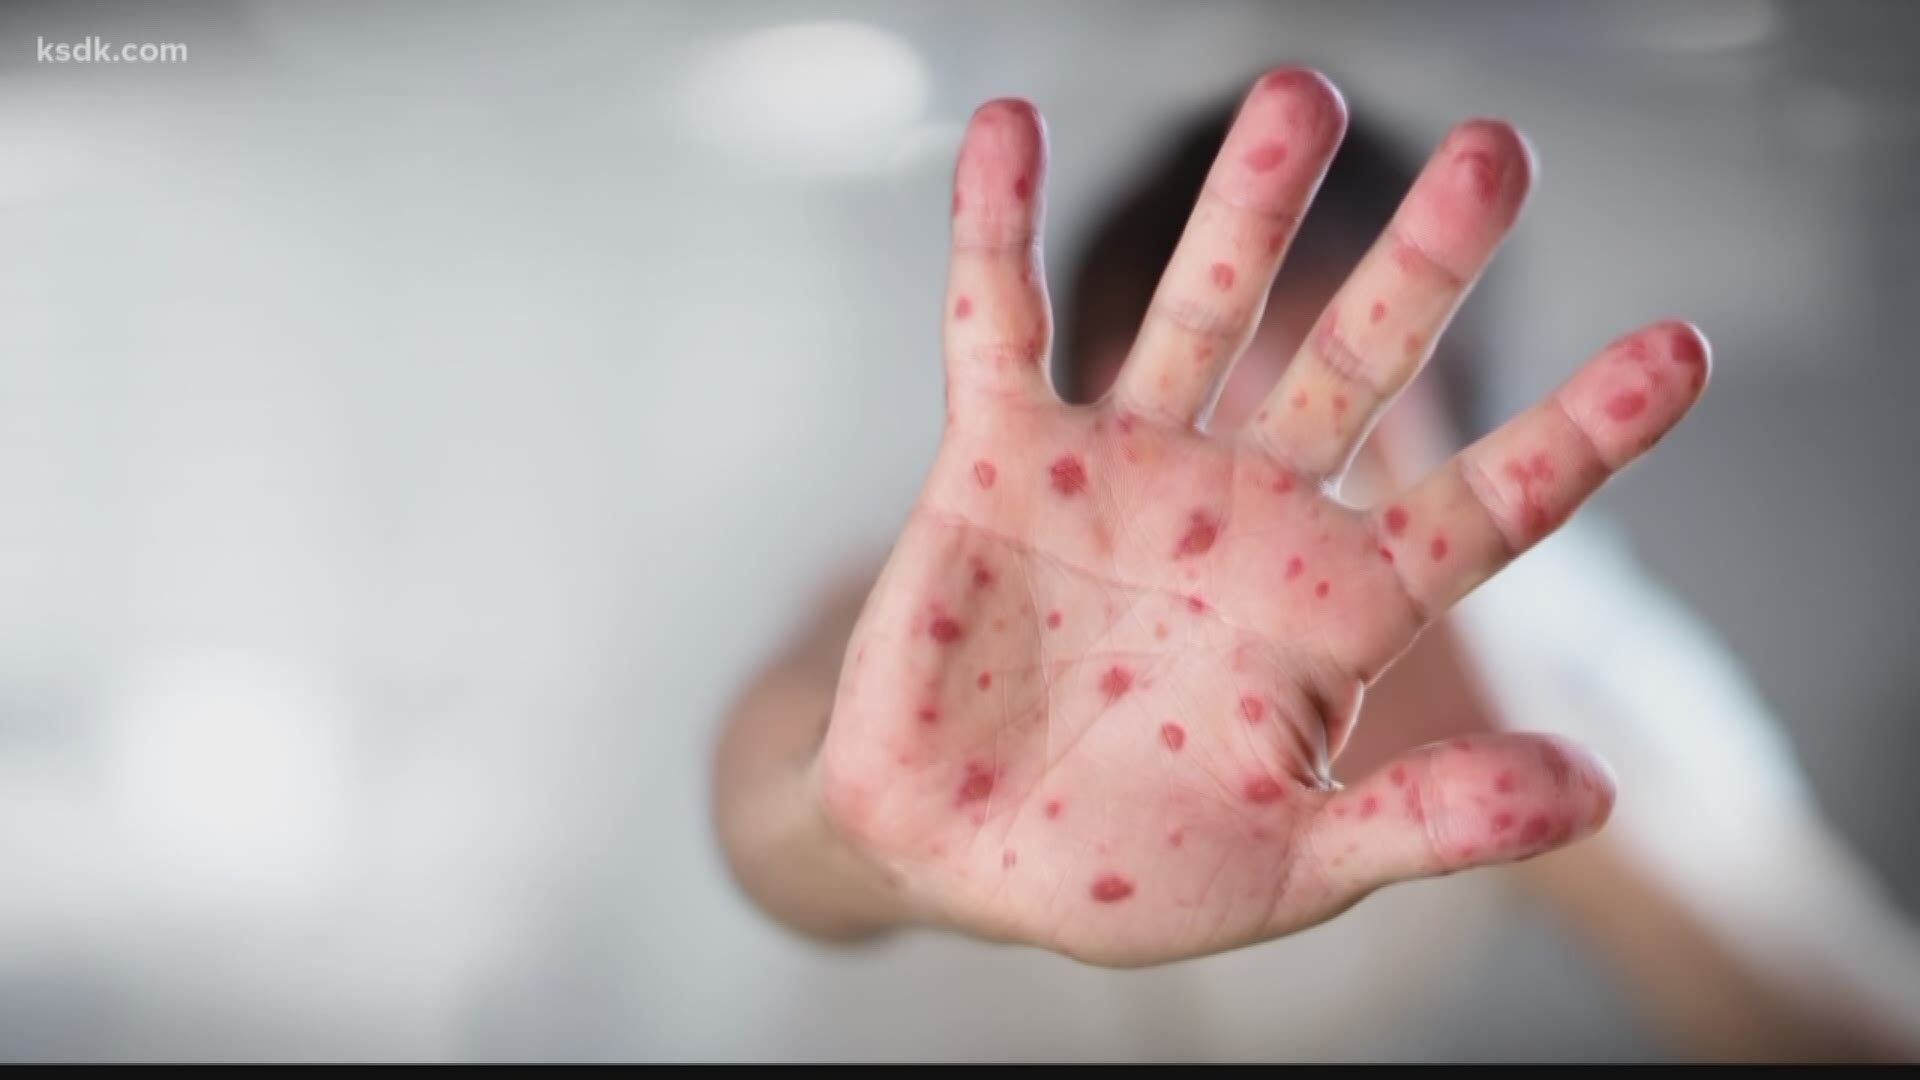 The health department is working to identify and contact anyone who may have been exposed to this case of measles.